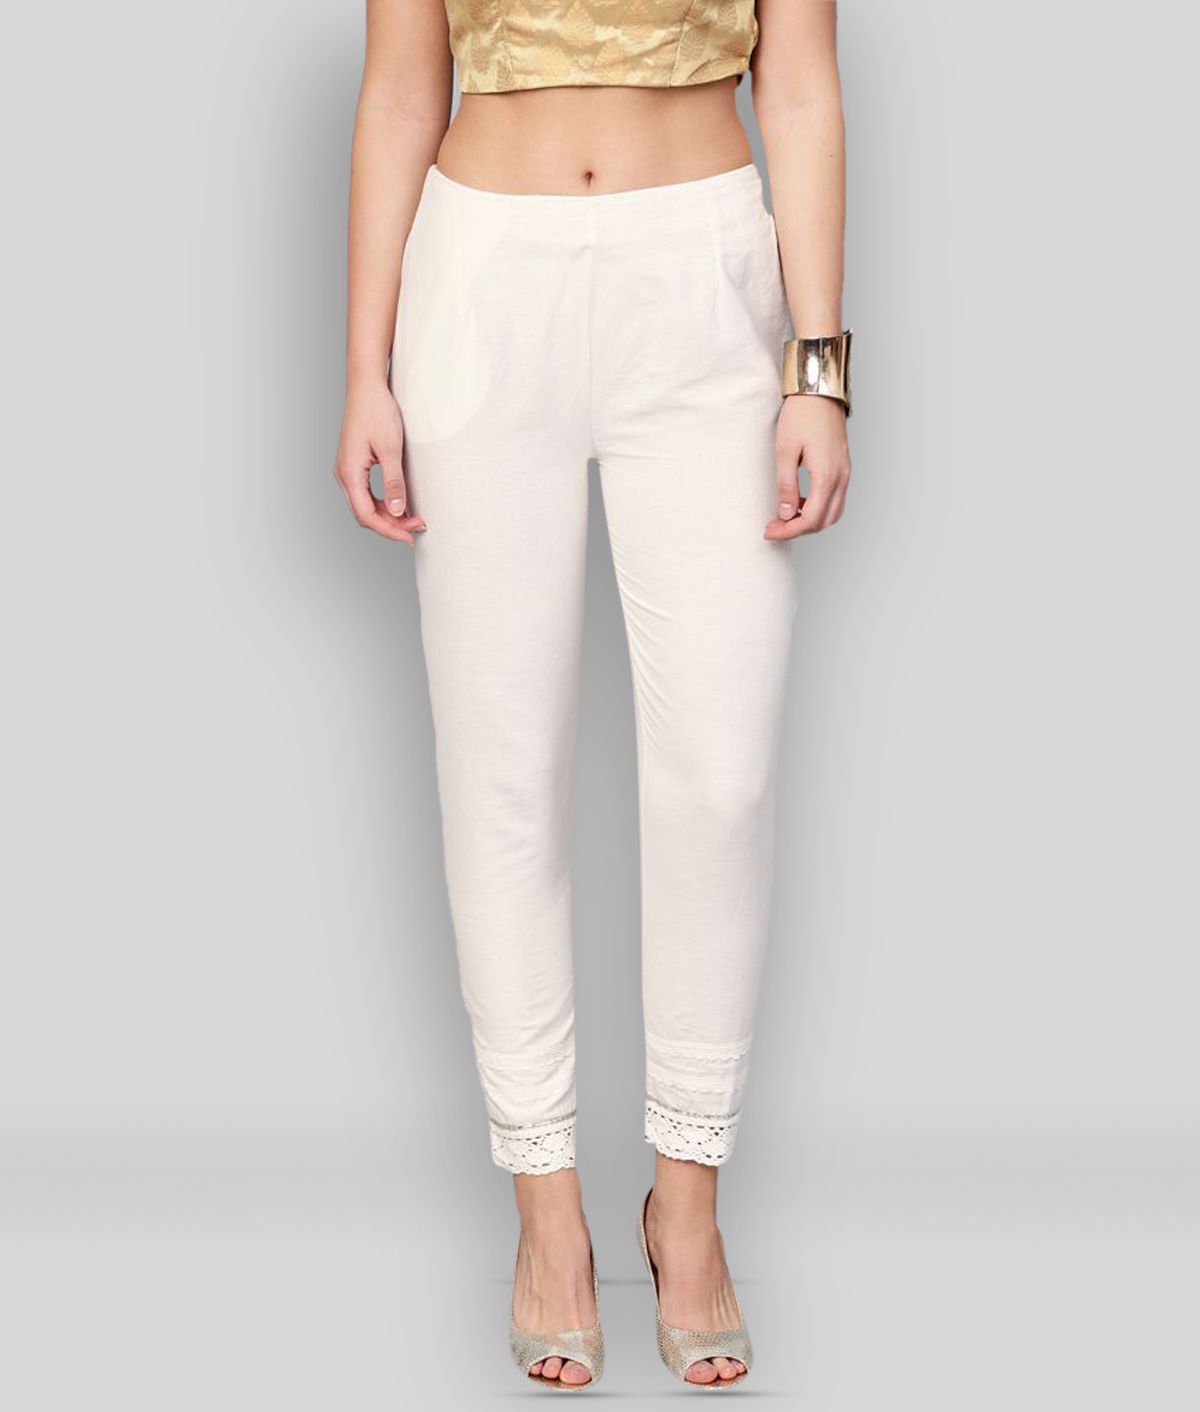     			Juniper - White Cotton Slim Fit Women's Casual Pants  ( Pack of 1 )